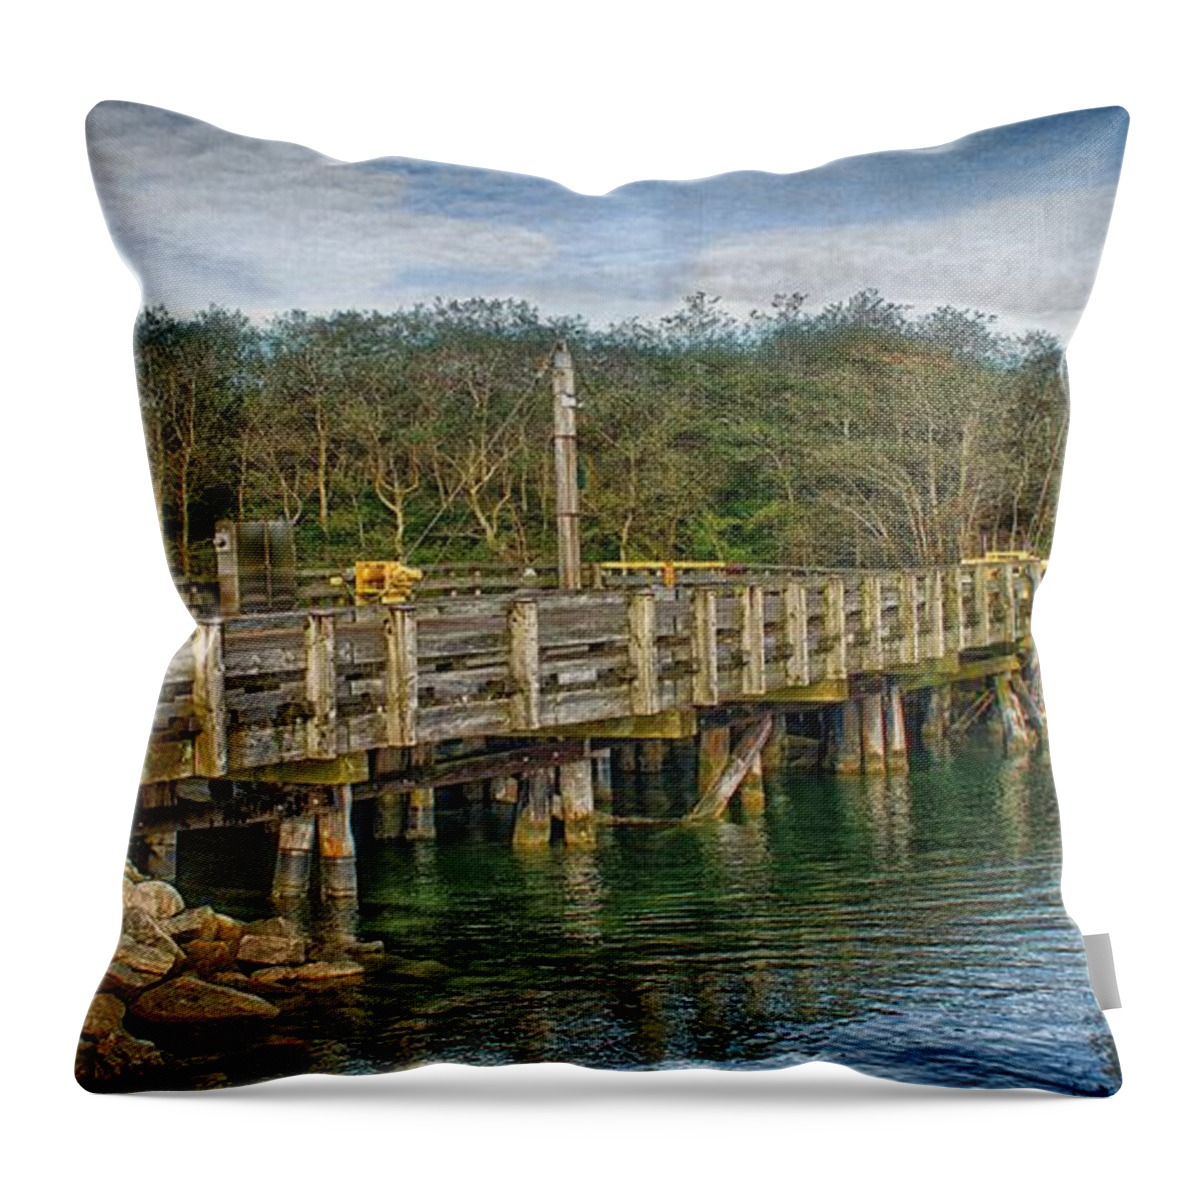 Mitchell River Throw Pillow featuring the photograph Chatham Mitchell River Draw Bridge  by Constantine Gregory